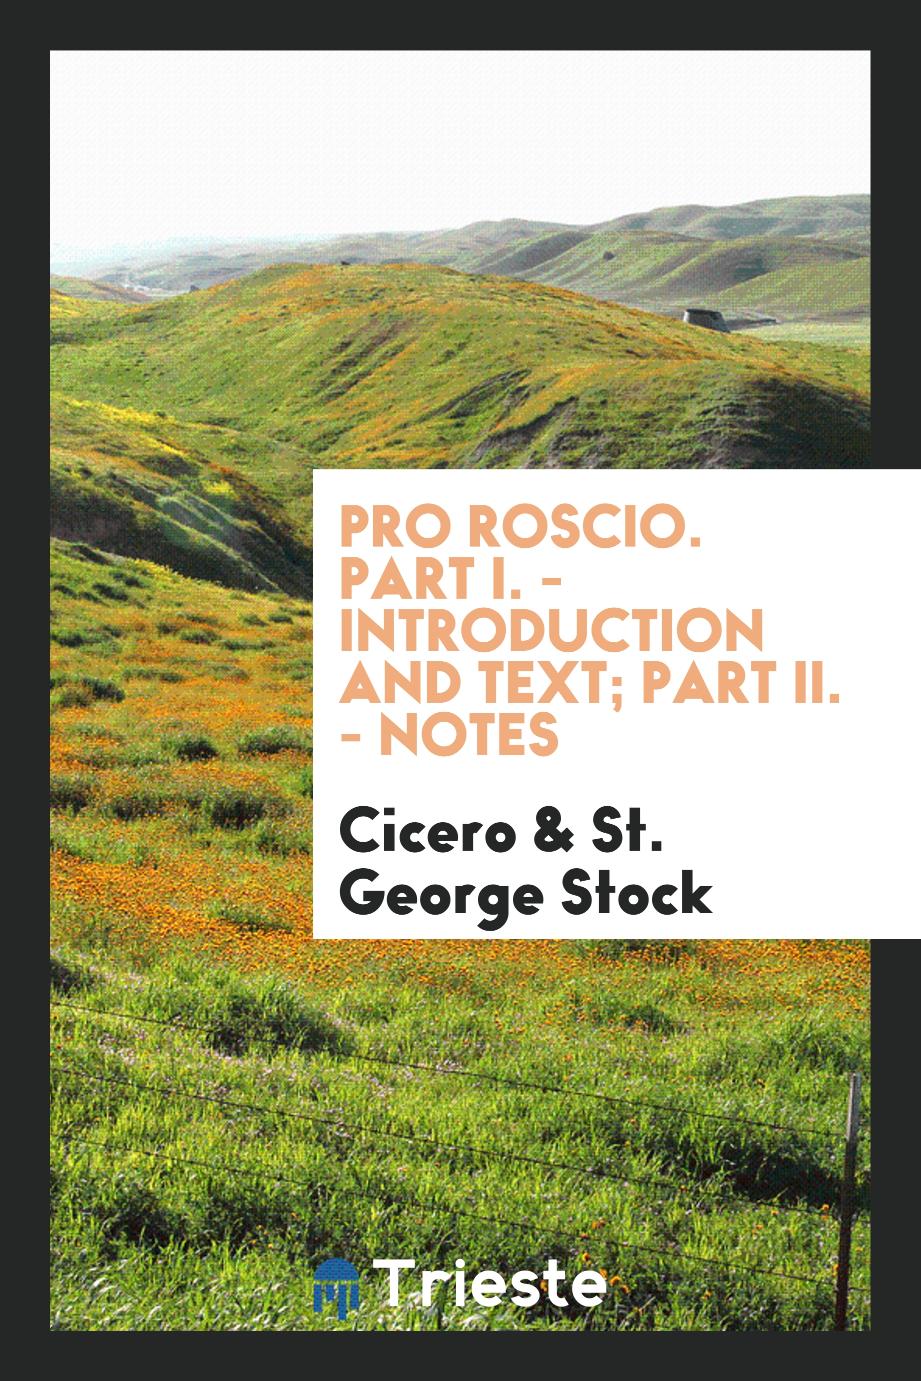 Pro Roscio. Part I. - Introduction and text; Part II. - Notes